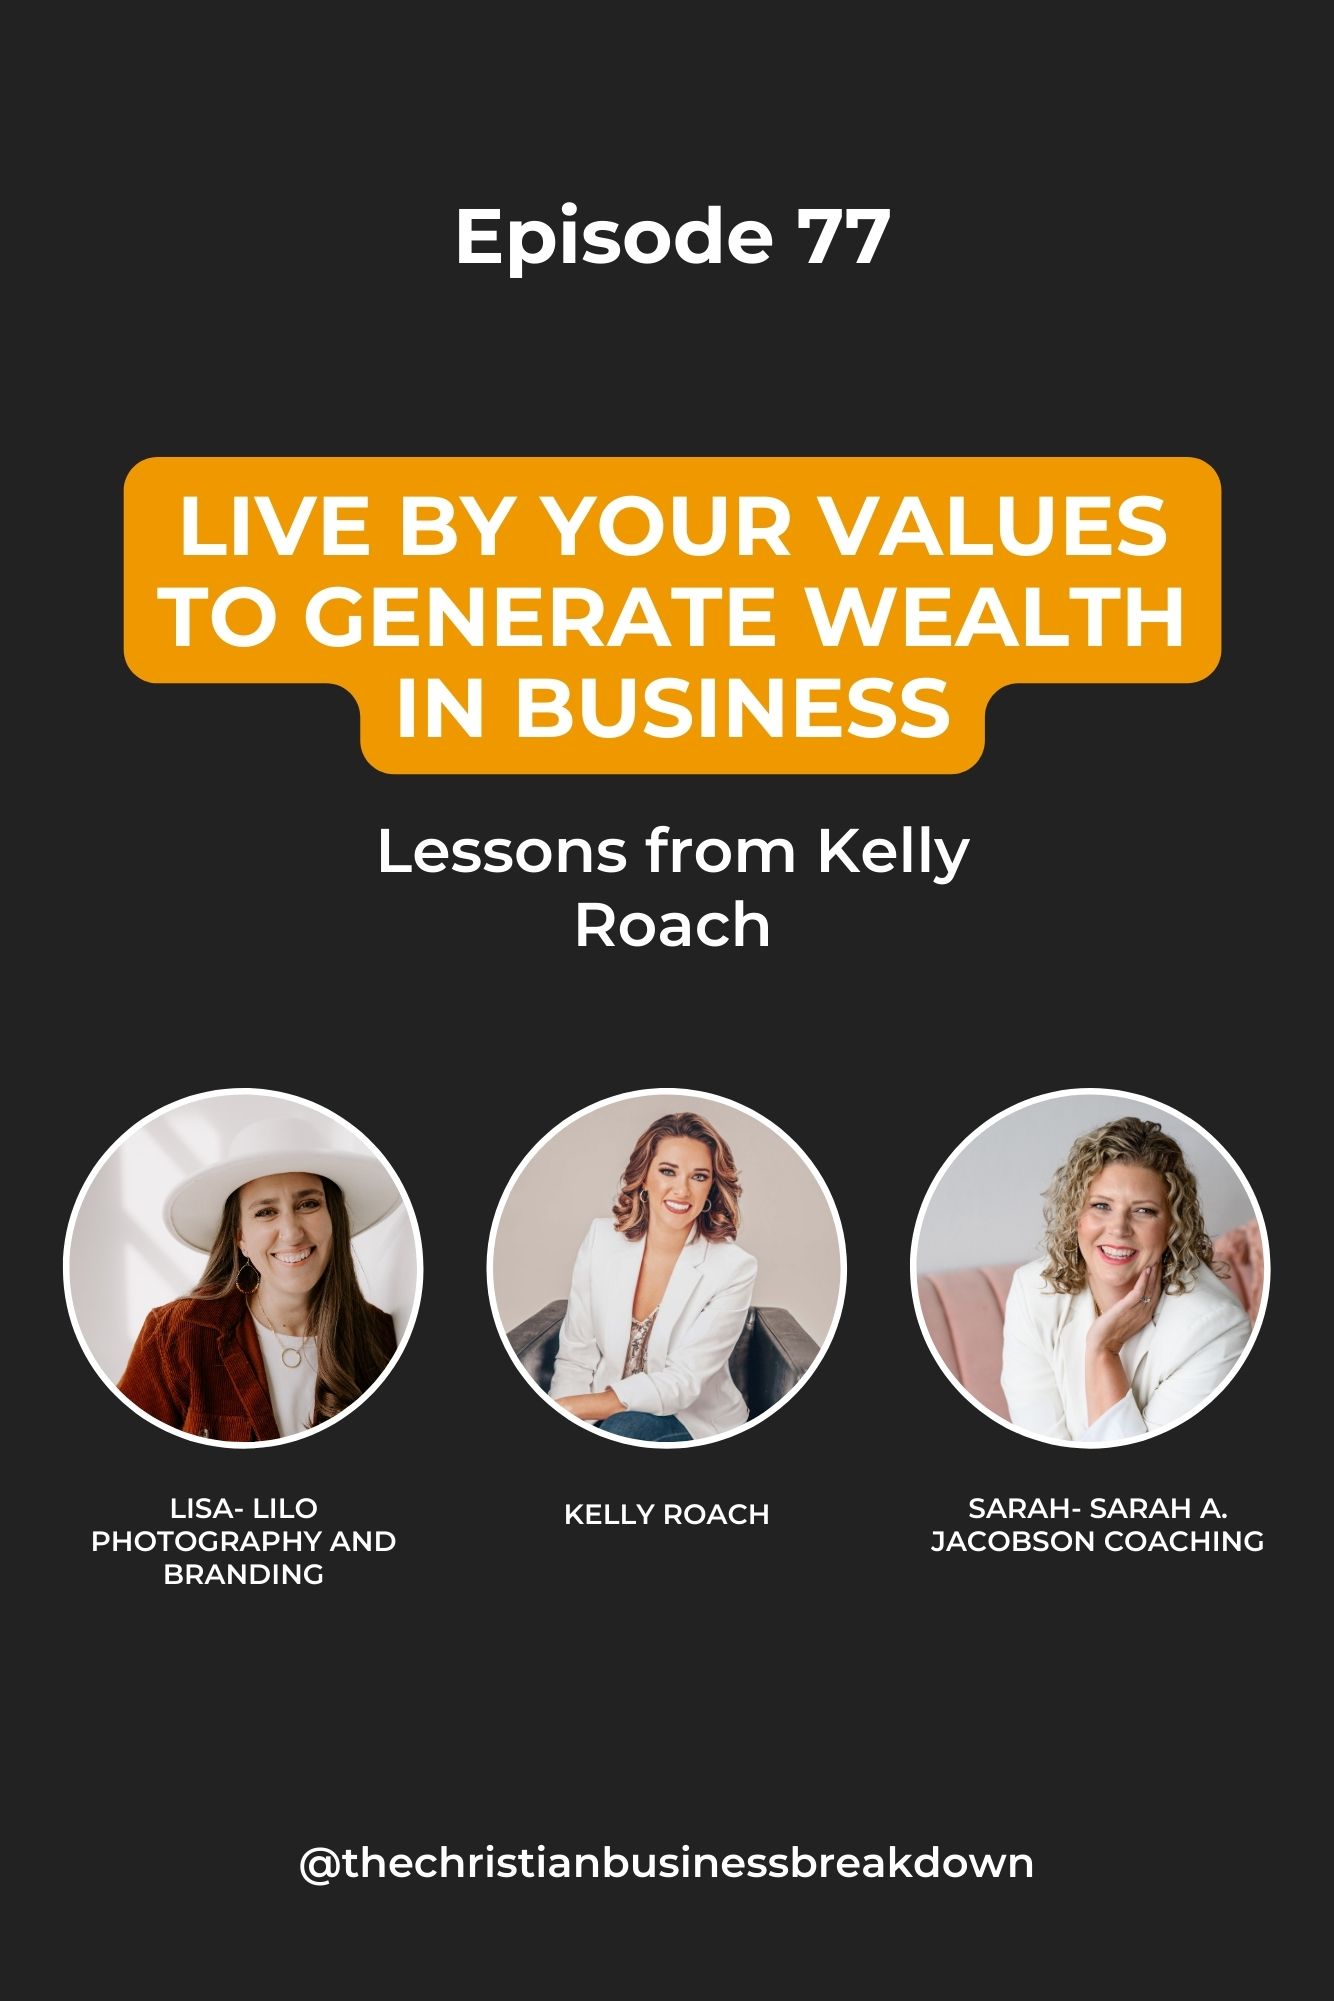 This Christian women's business podcast cover photo bears the images of three christian women entrepreneurs and talks about how you can live by your values and generate wealth in business.